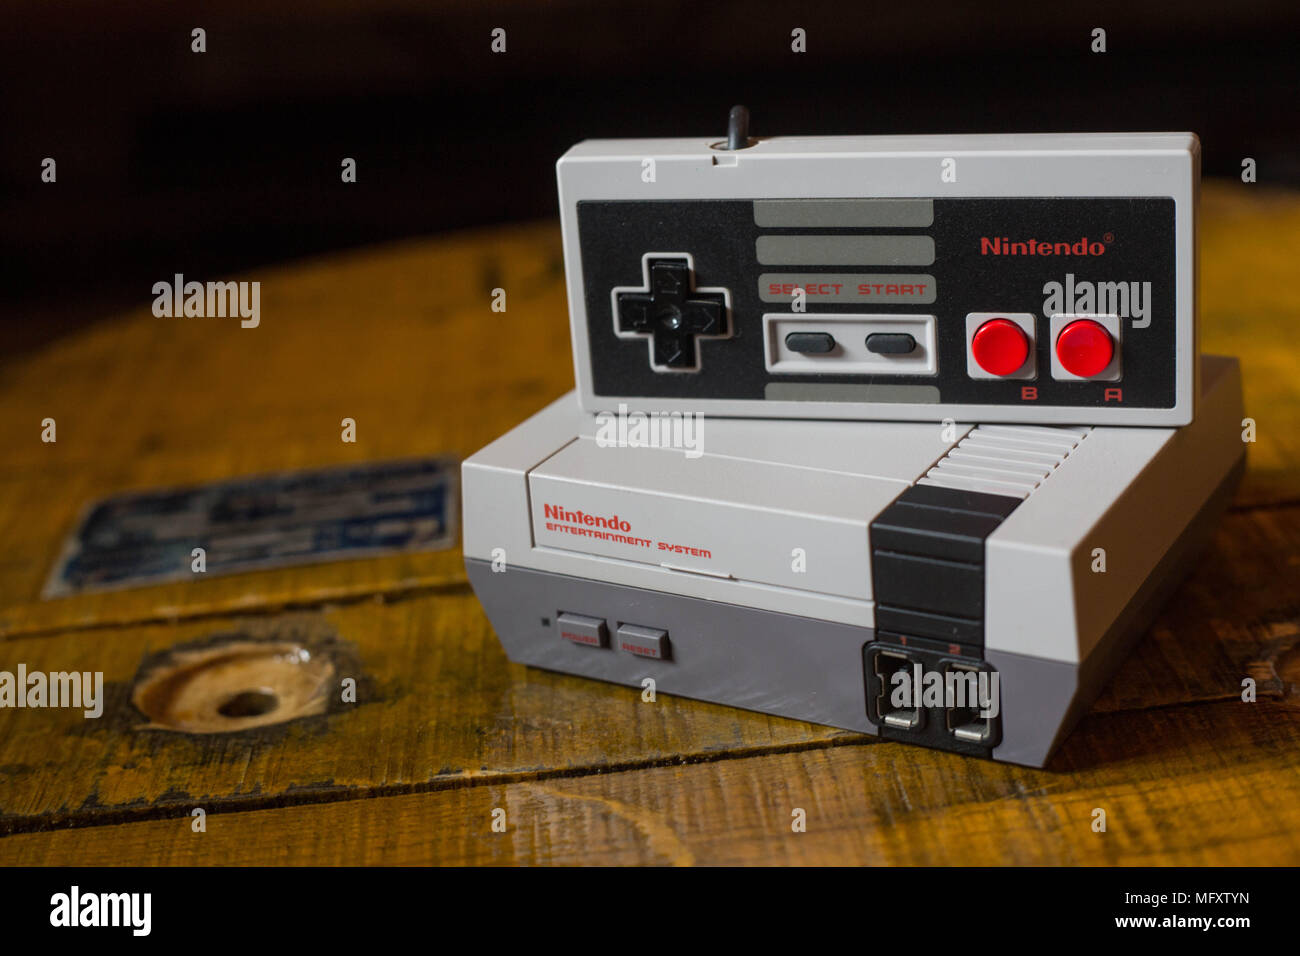 A Nintendo Classic Mini 'Nintendo Entertainment System' video game console  with a controller. The Kyoto based video game company Nintendo ended it's  comeback year revenue with worth $9 Billion after a glorious